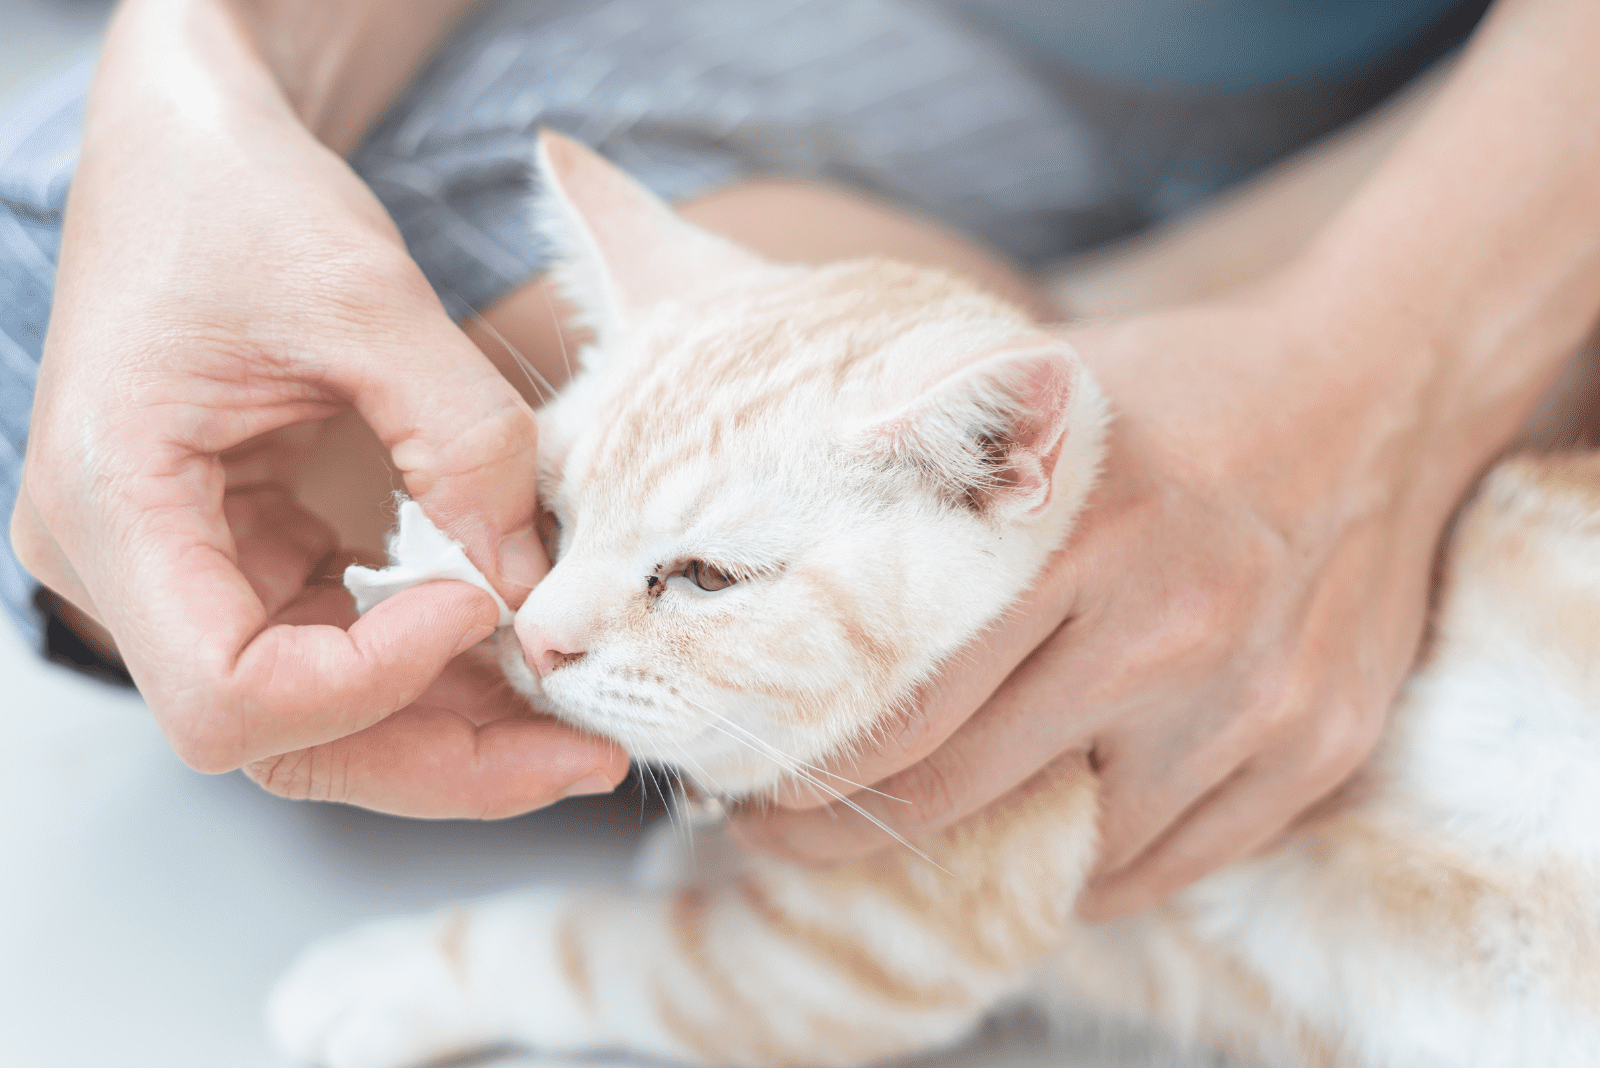 a woman cleans a cat's eyes